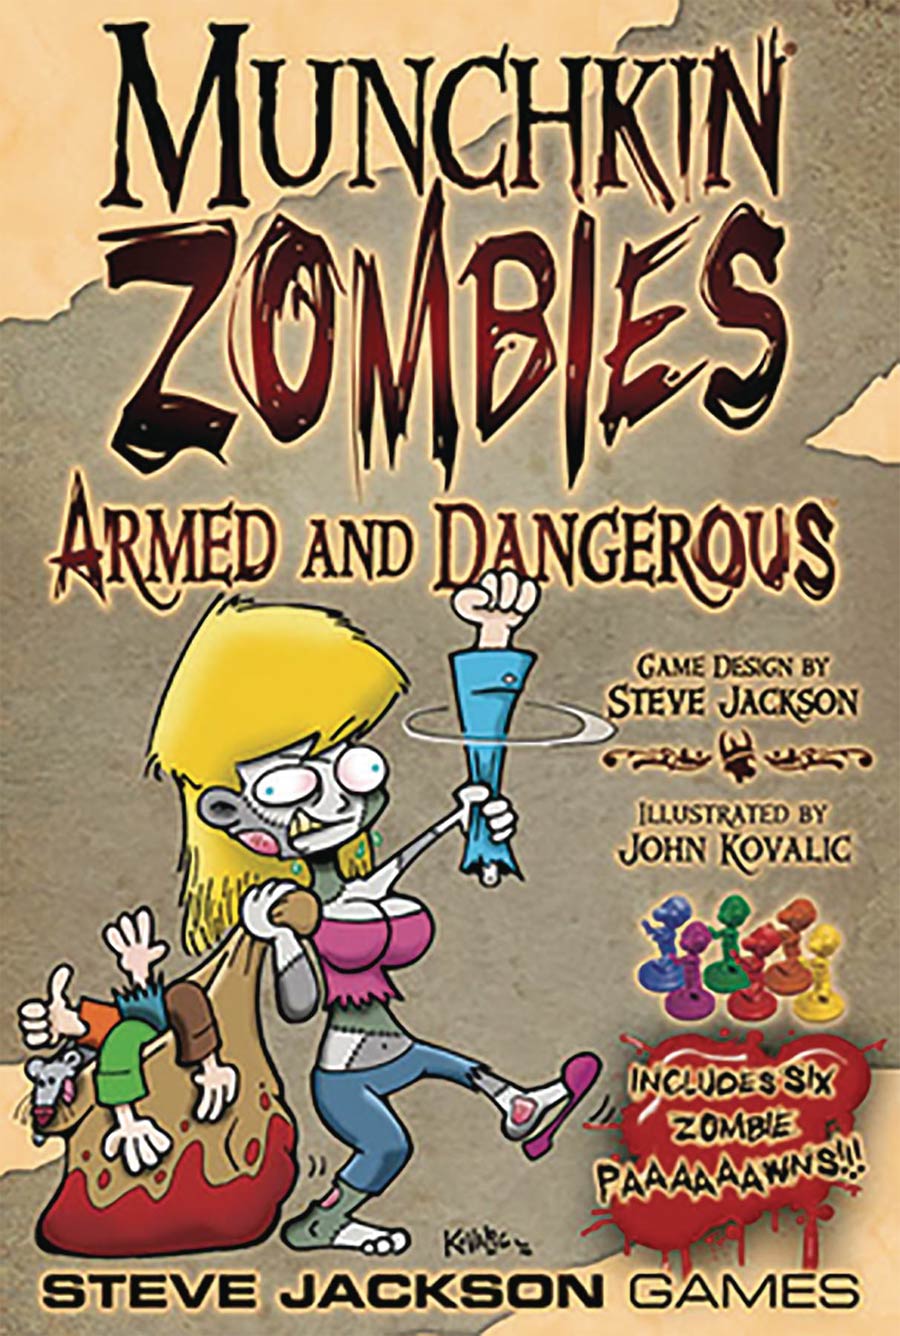 Munchkin Zombies Armed And Dangerous Expansion